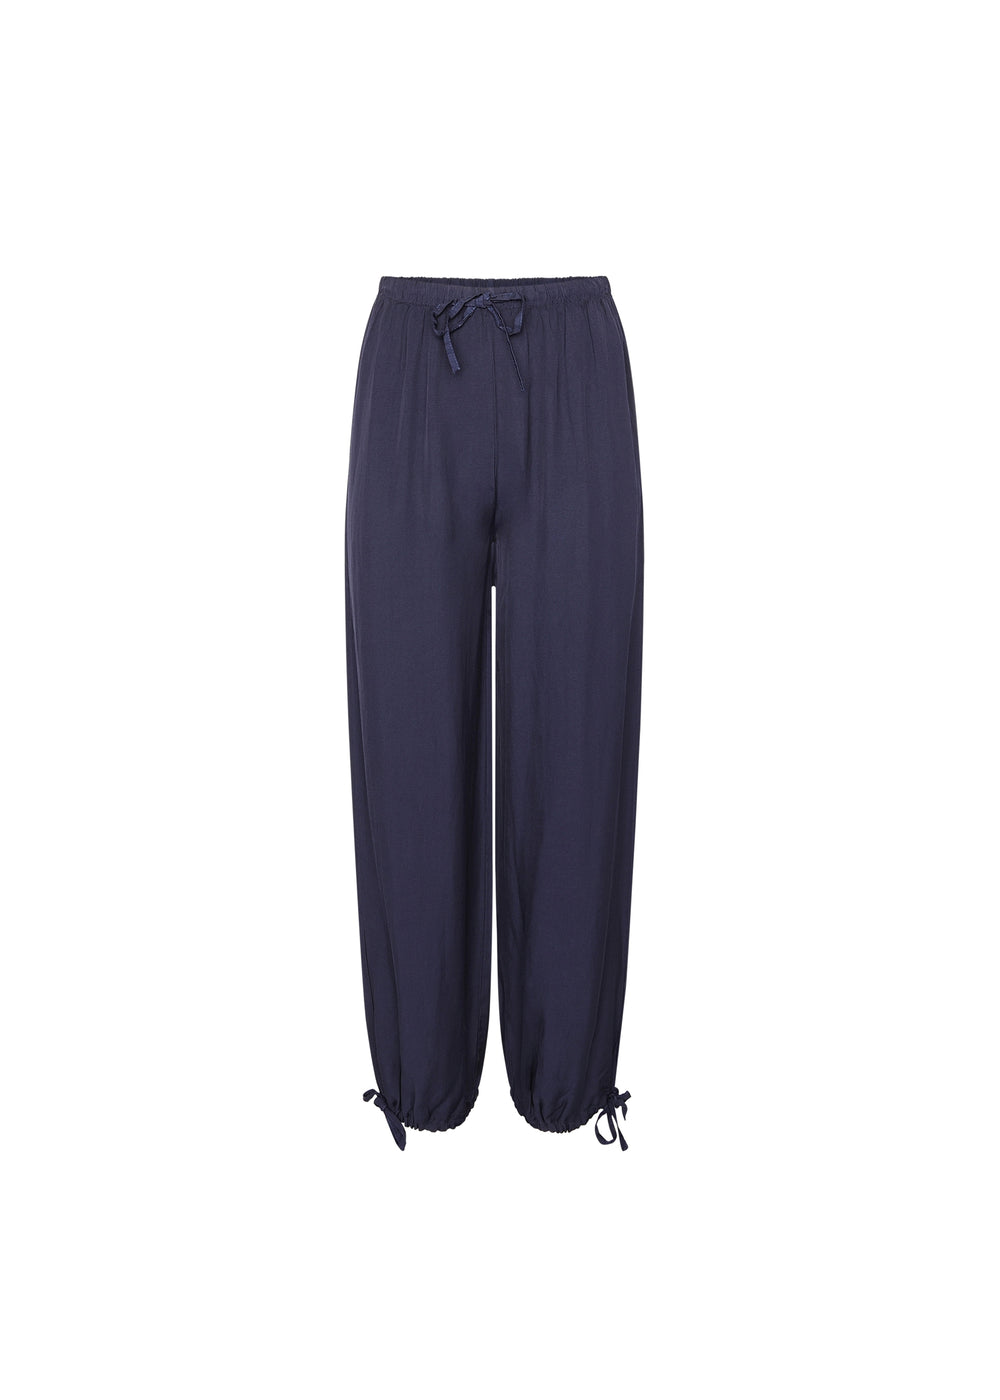 CLODIE Navy Blue Trousers